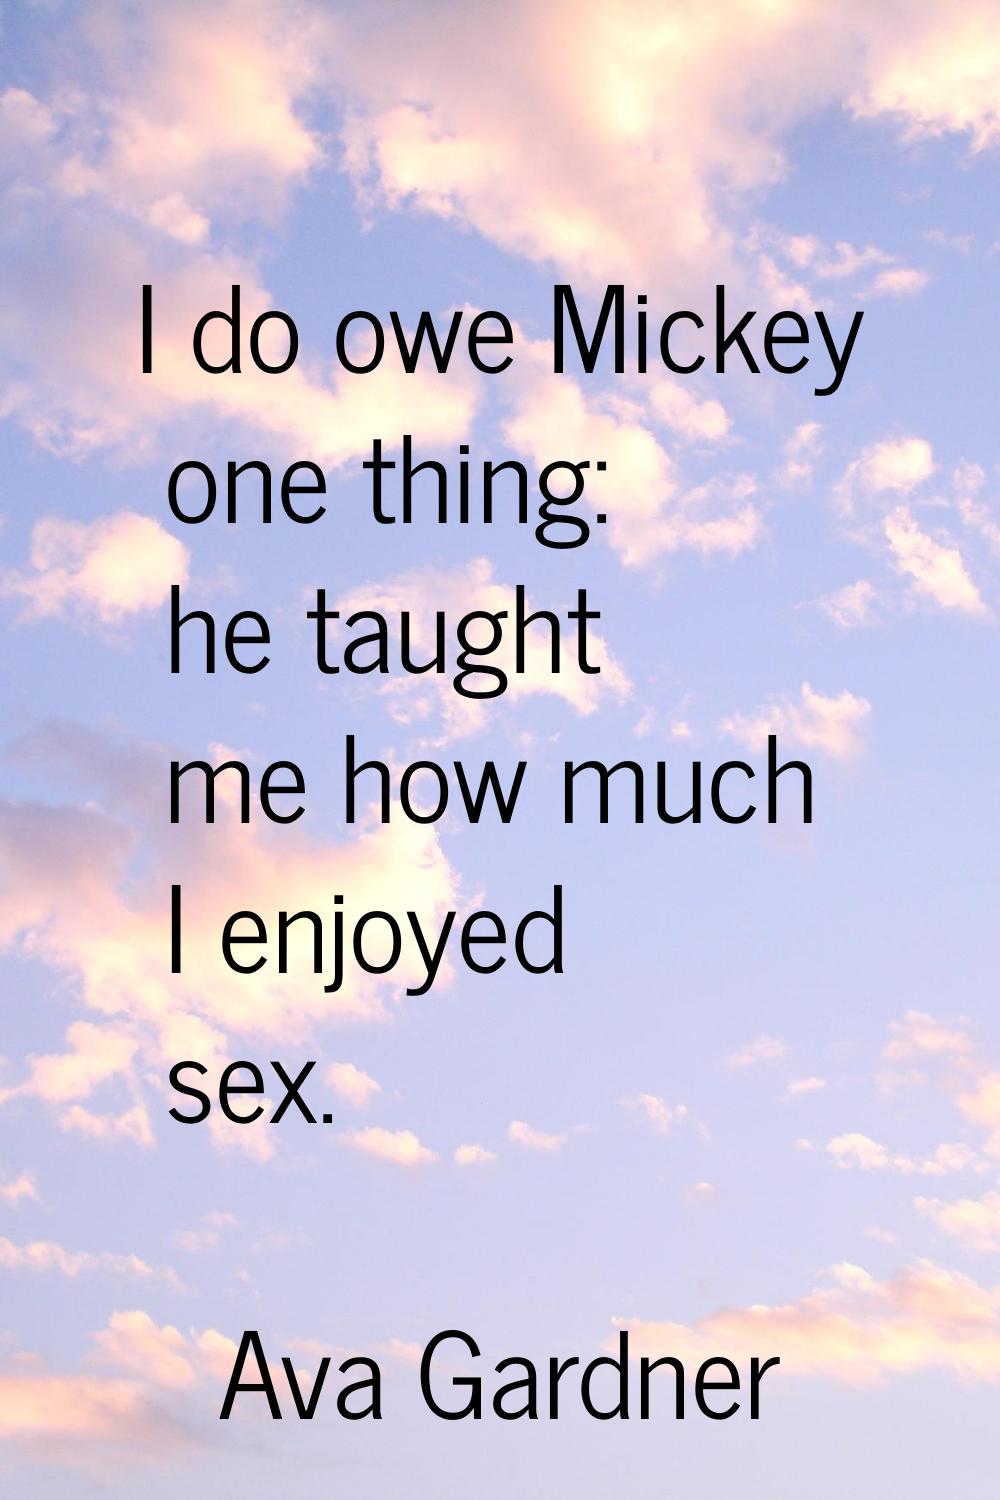 I do owe Mickey one thing: he taught me how much I enjoyed sex.